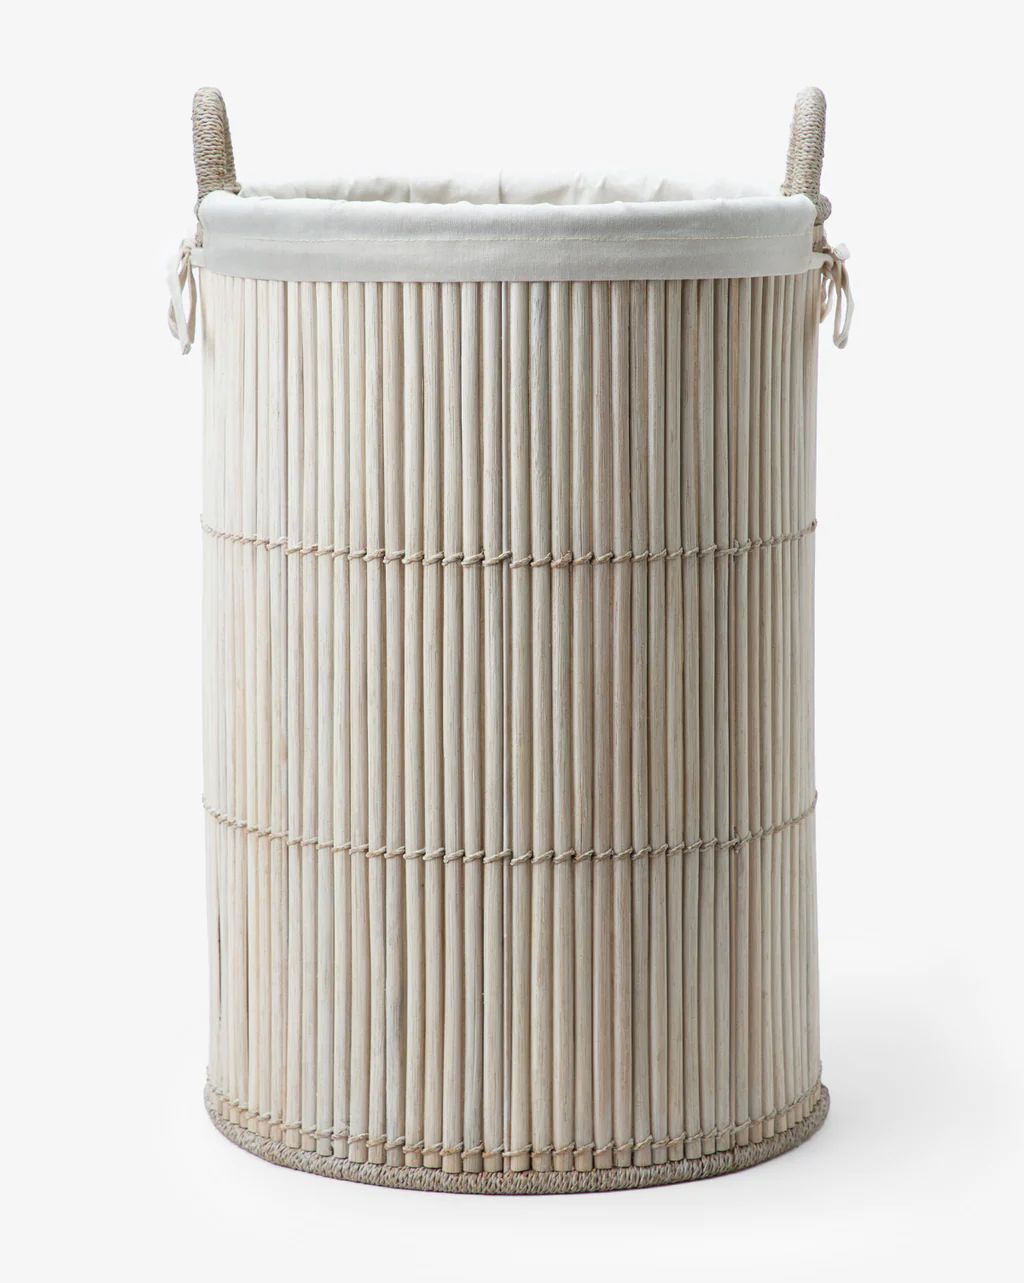 Raleigh Laundry Basket | McGee & Co.